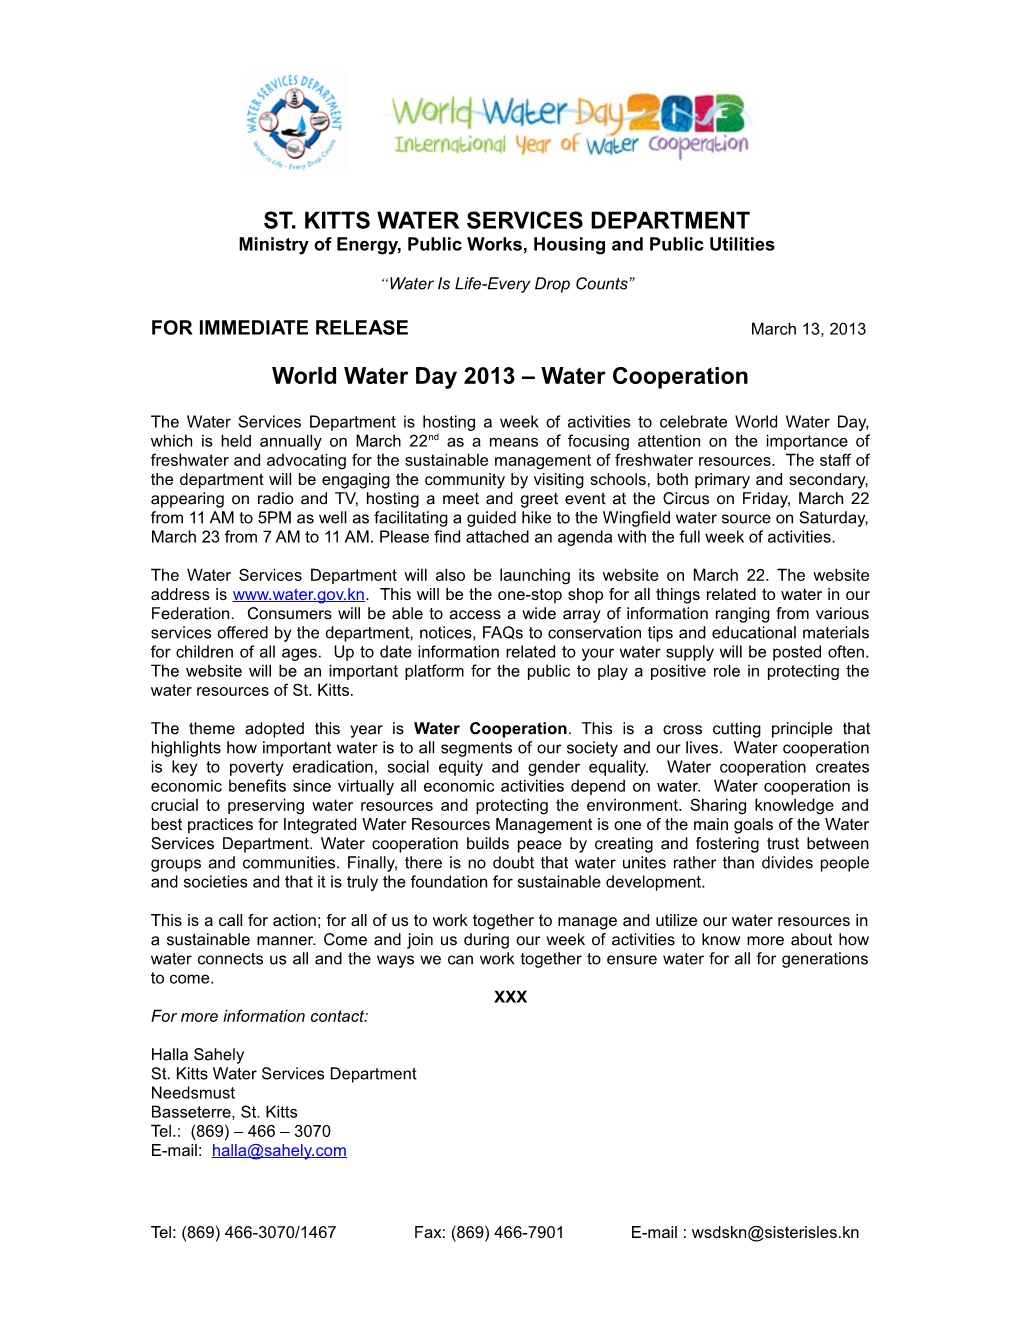 St. Kitts Water Services Department